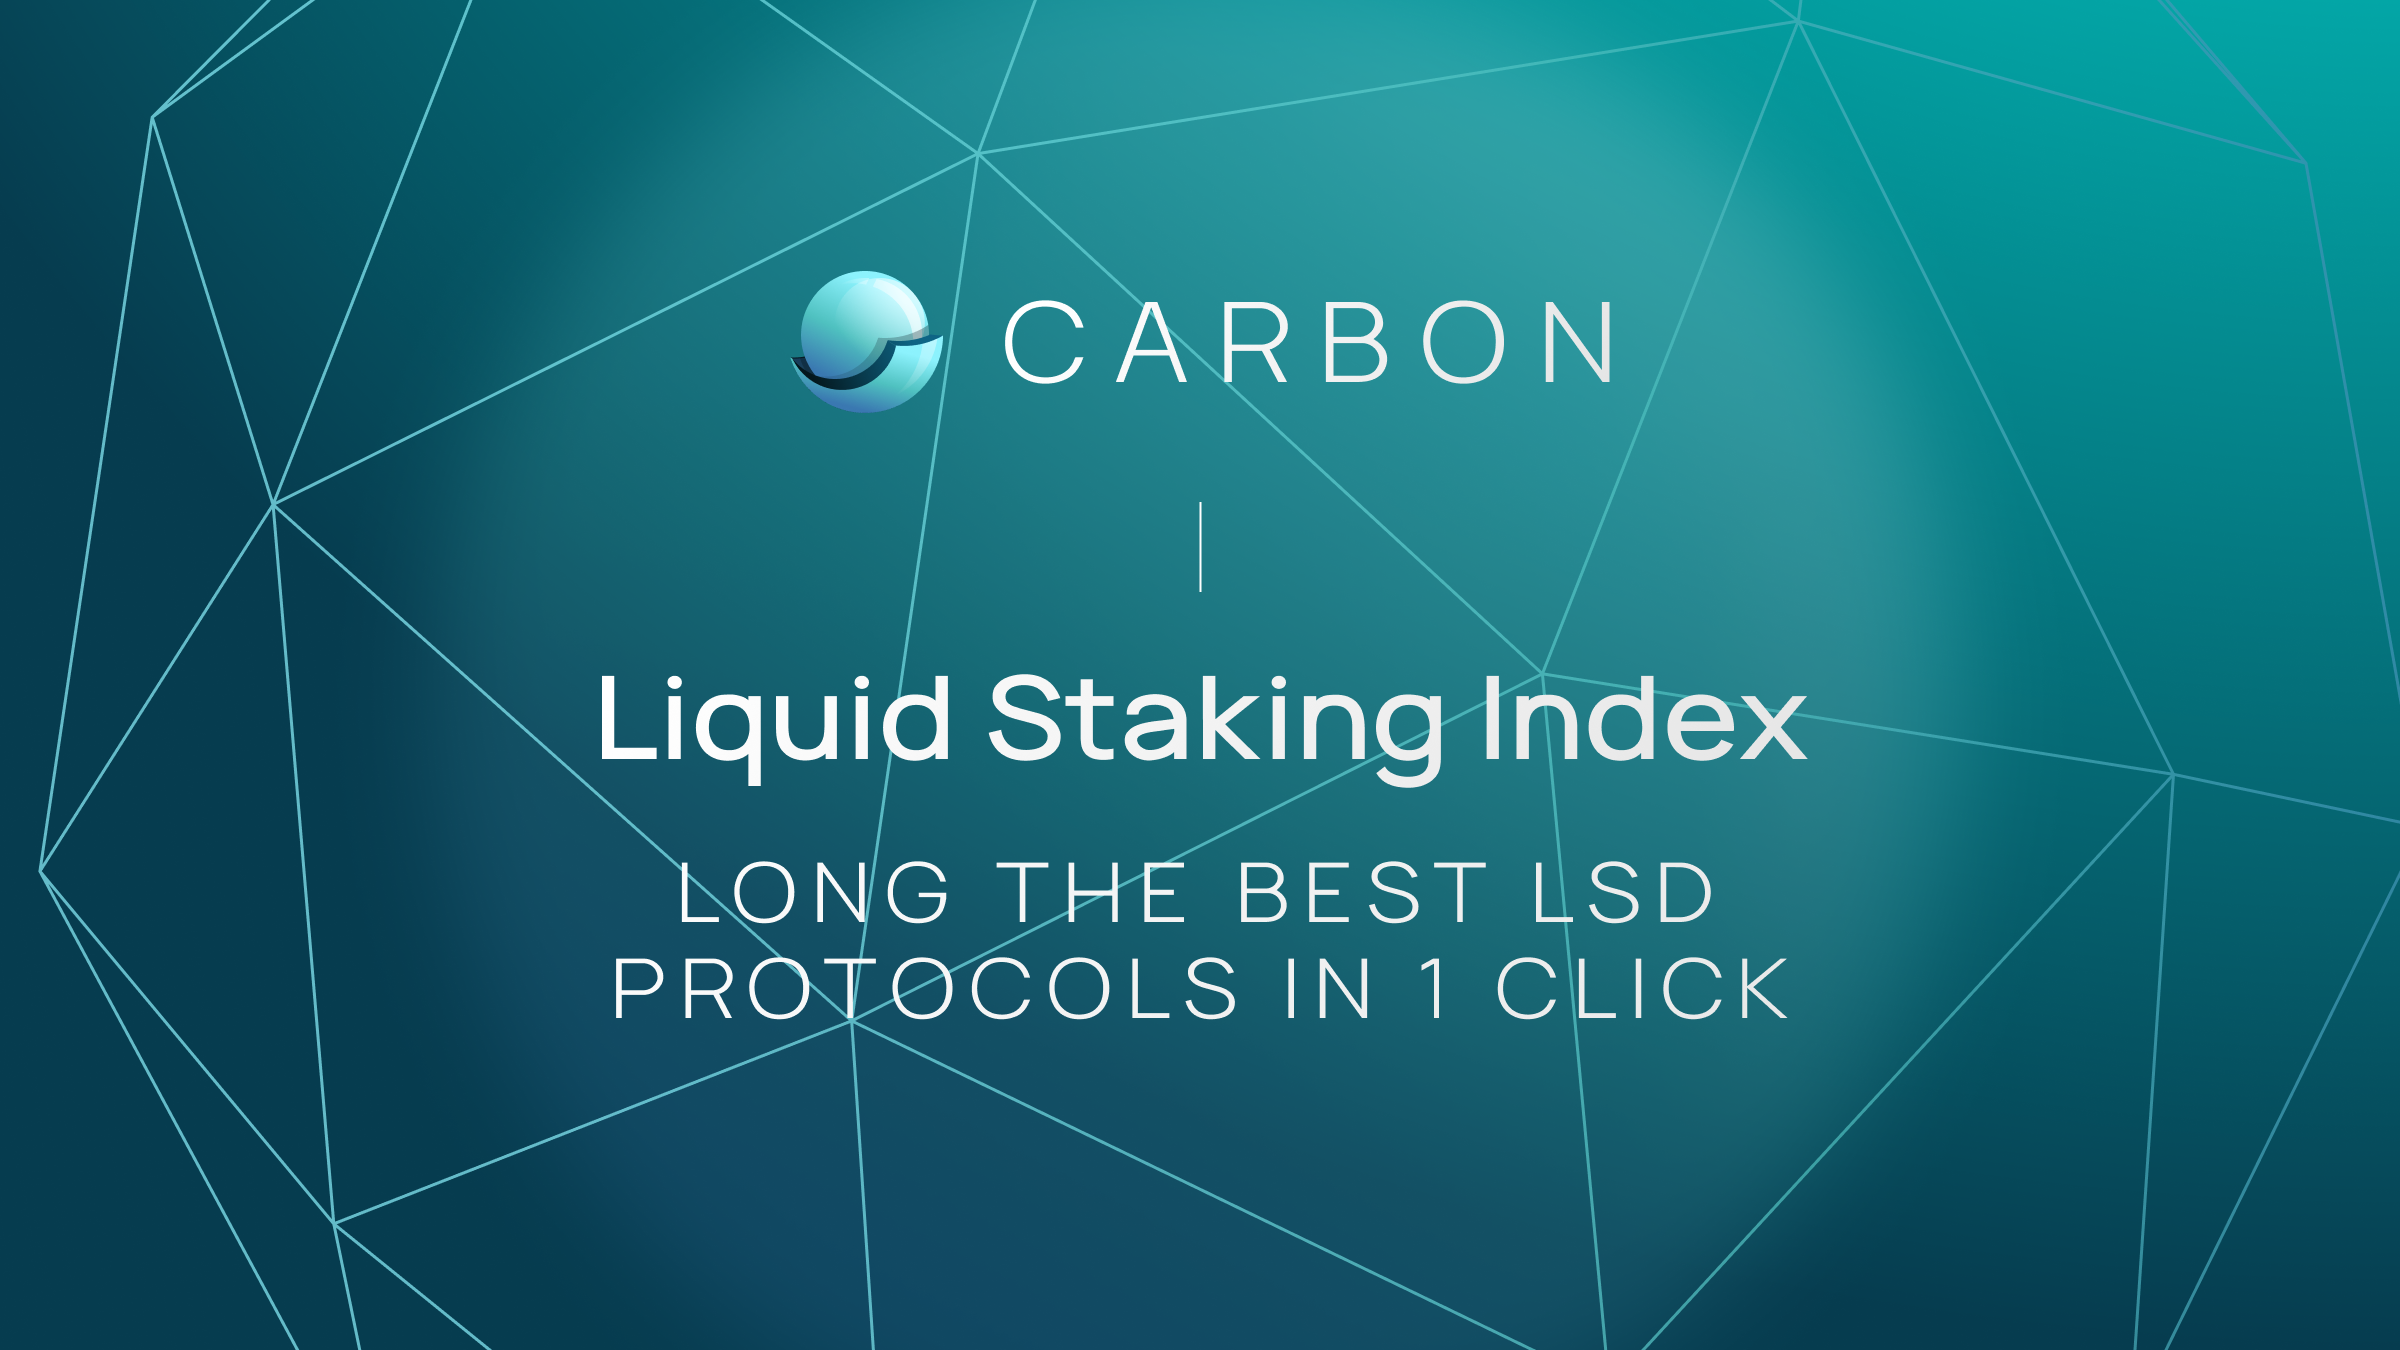 First Liquid Staking Index - Long the best LSD protocols in 1 click.